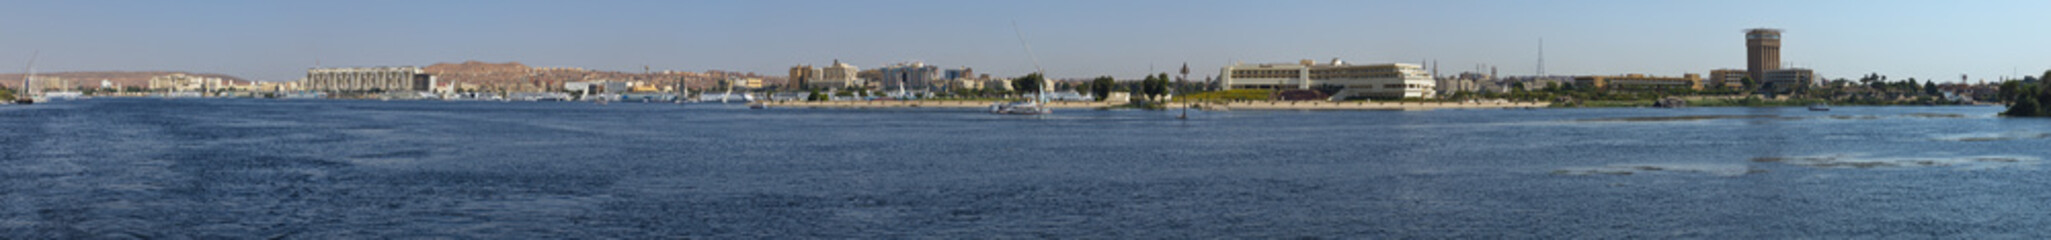 Panoramic view of the east bank of Nile in Aswan, Egypt, Africa
